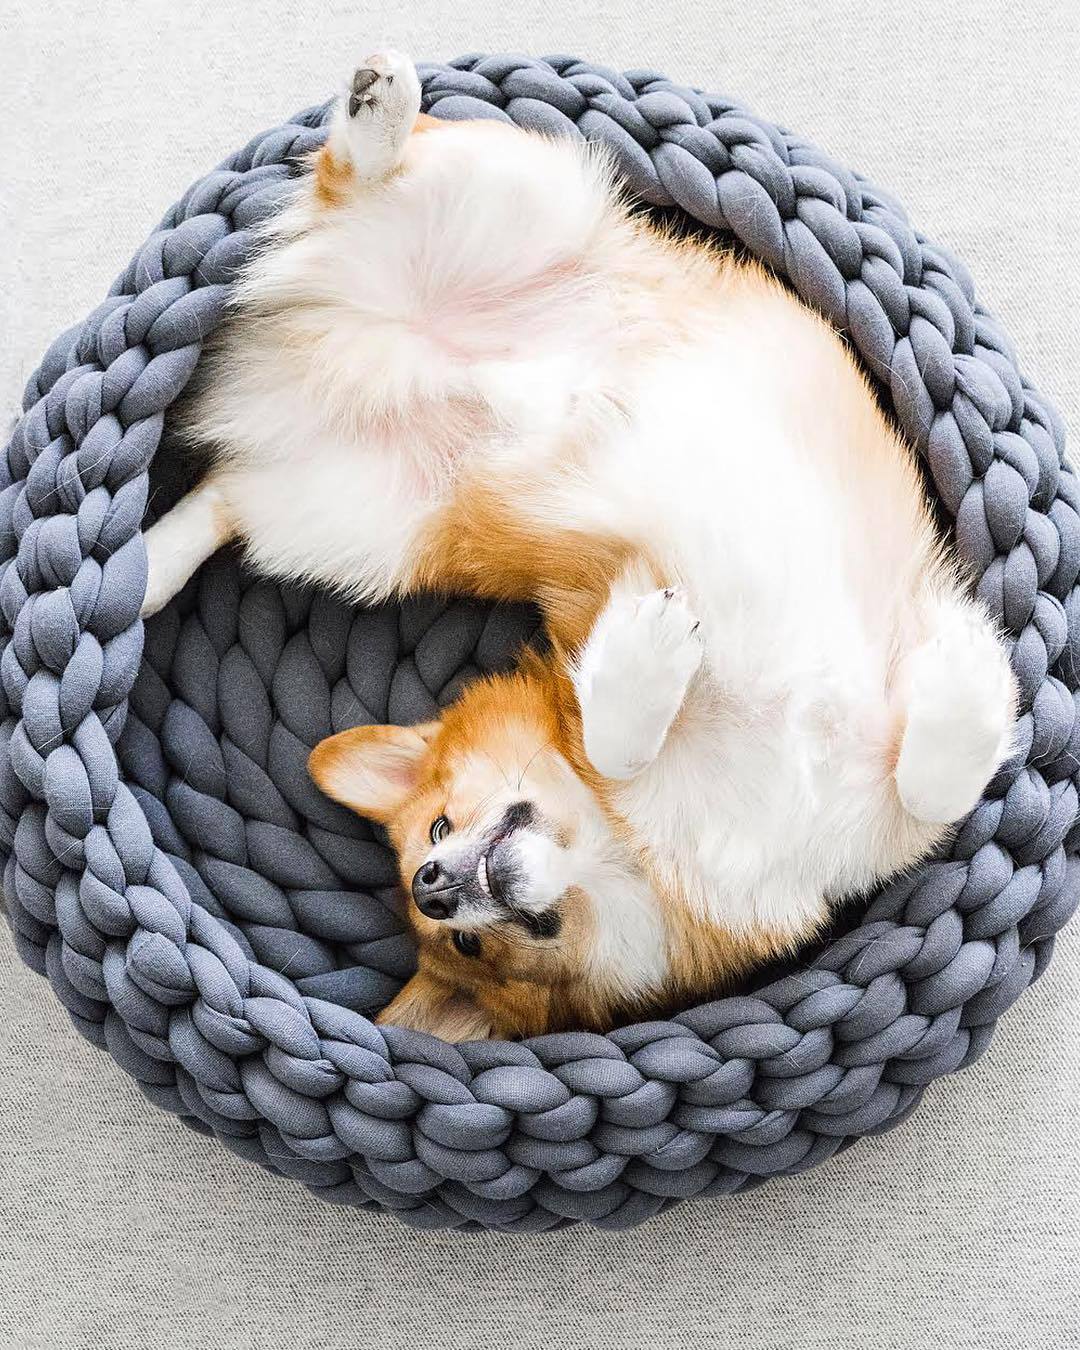 Cozy Hand Woven Dog Nest - Provide your pet with a warm and inviting place to rest